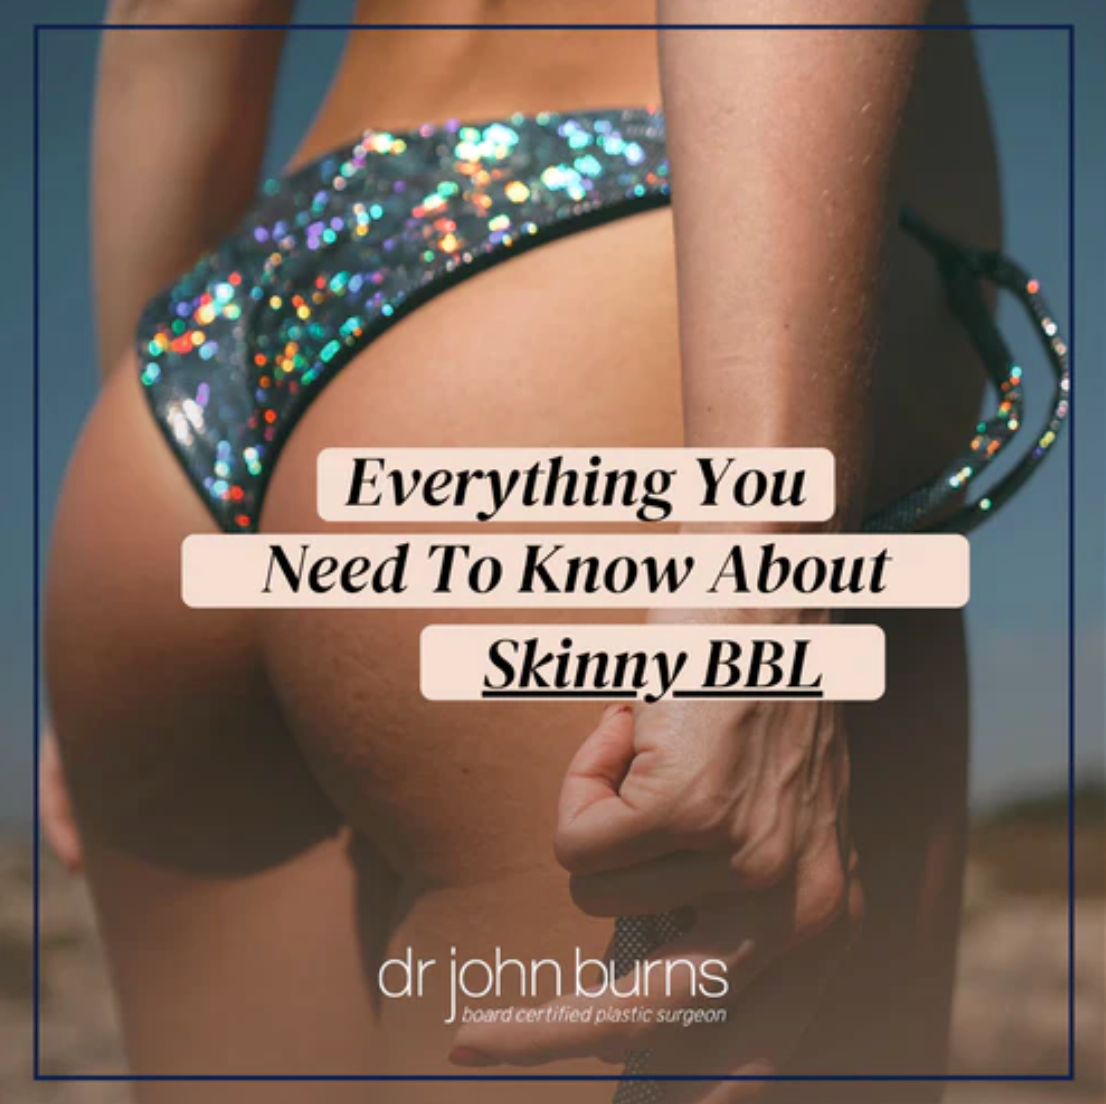 Everything You Need To Know About The Skinny BBL- Dr. John Burns.png__PID:0fefdb22-0249-4c5a-a602-455589f054c8